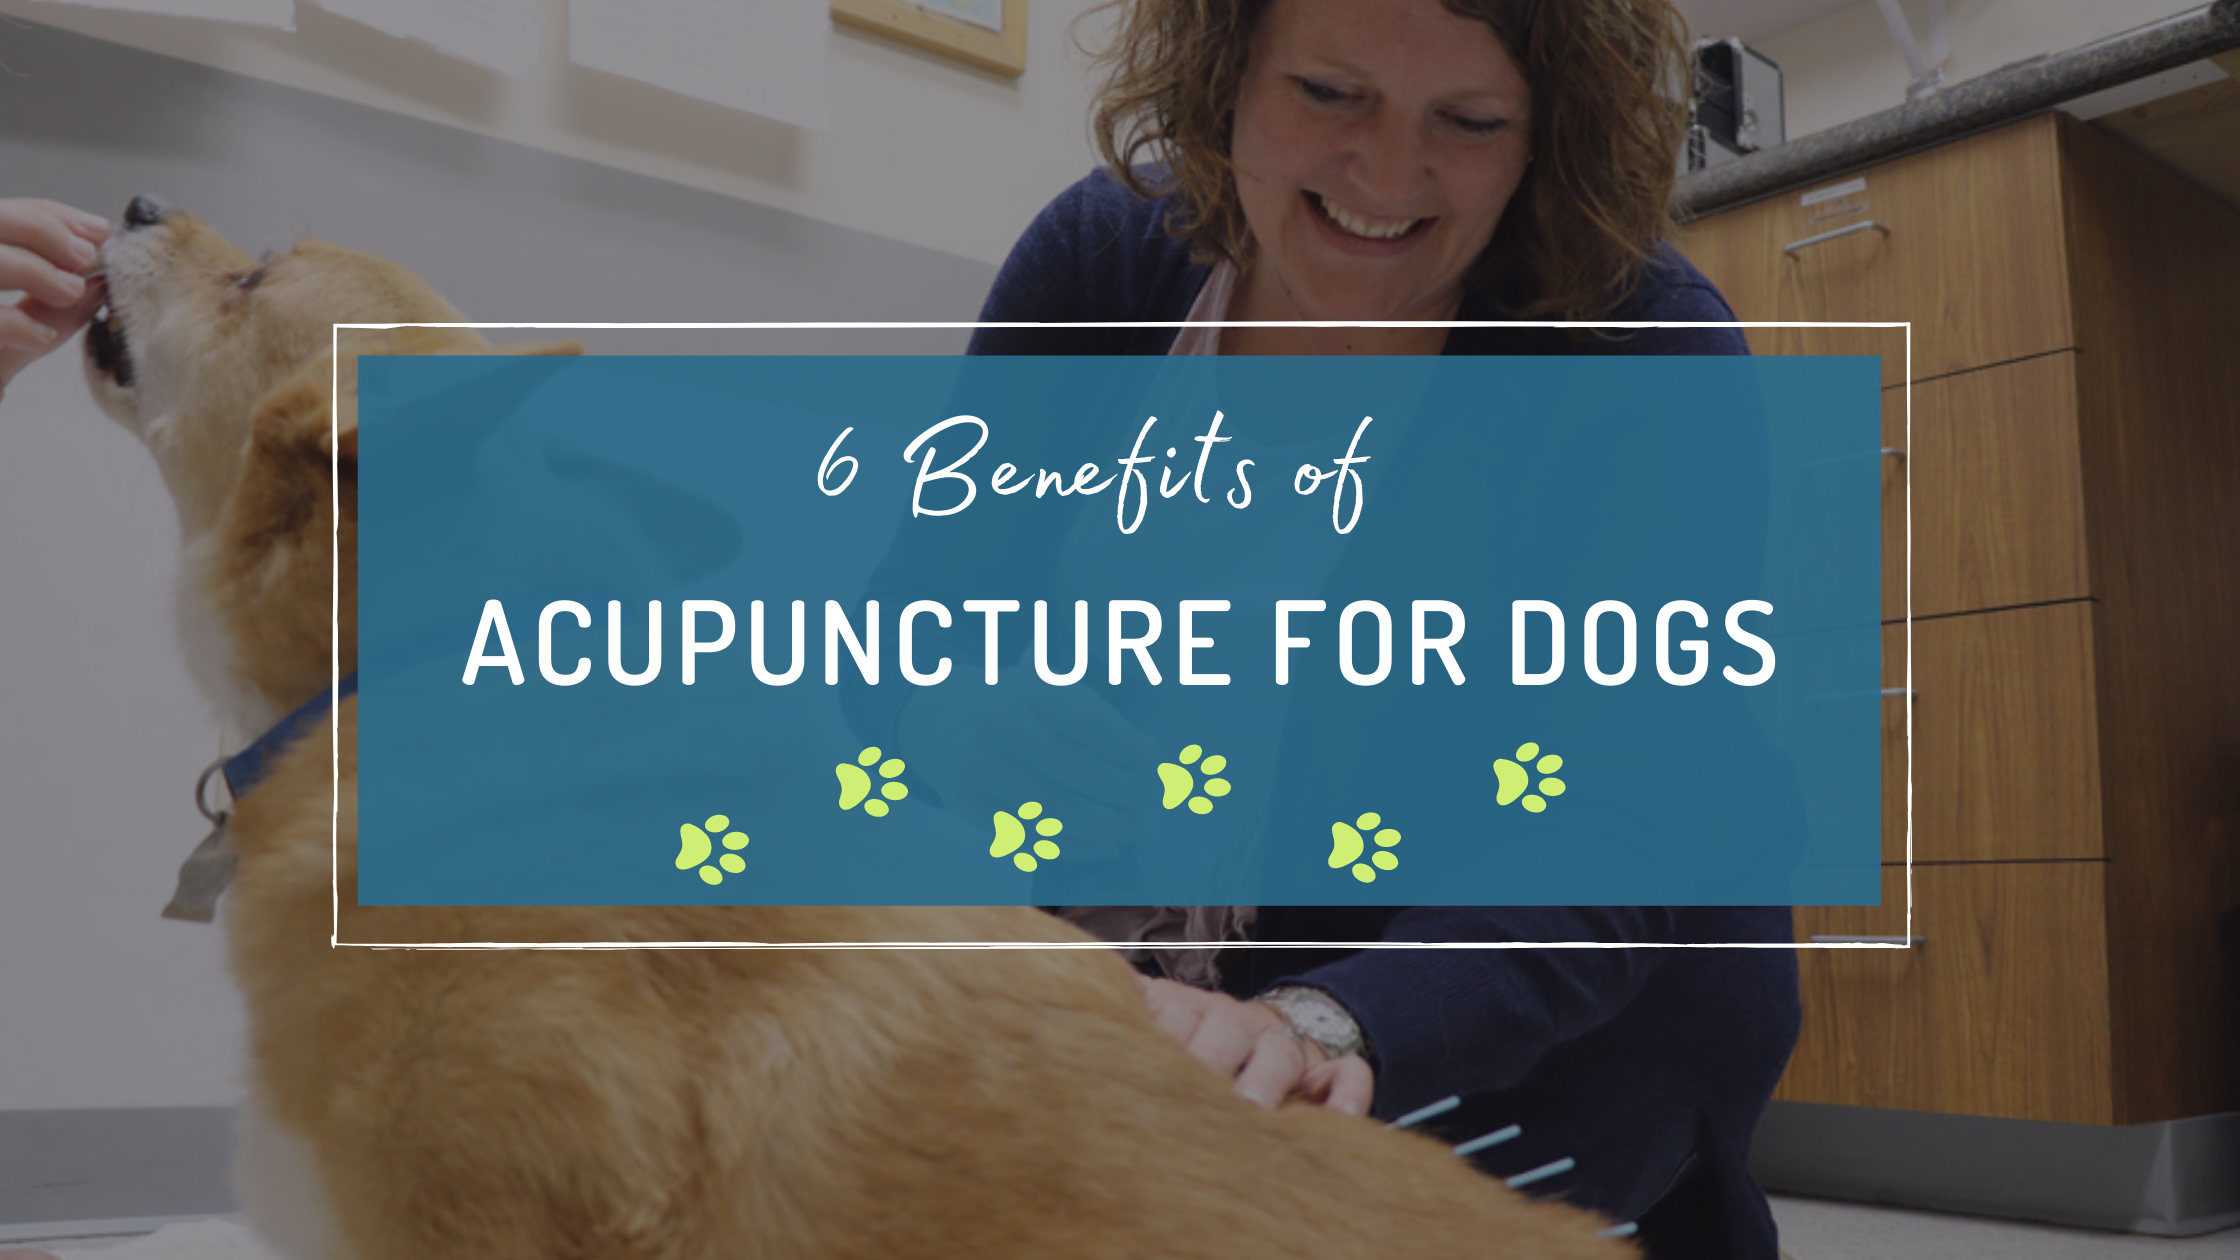 Acupuncture benefits for Dogs